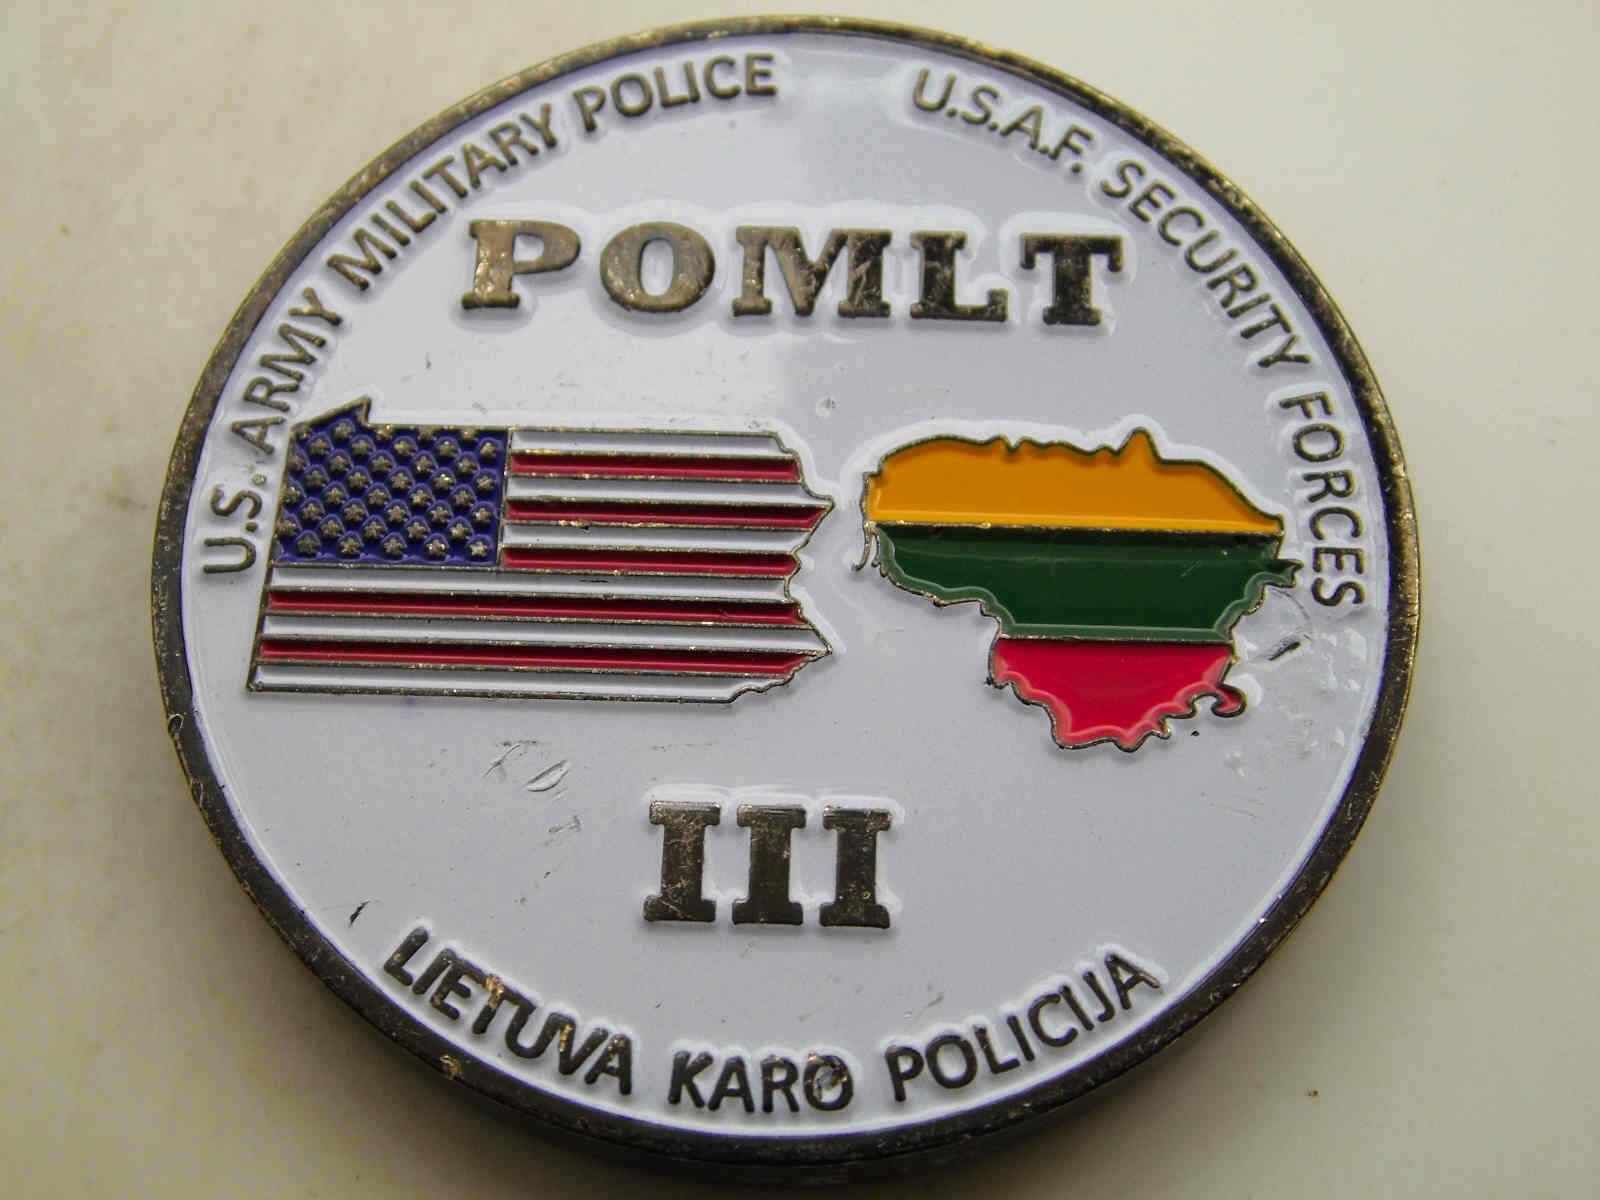 U.S. ARMY MILITARY POLICE U.S.A.F. SECURITY FORCES POMLT CHALLENGE COIN